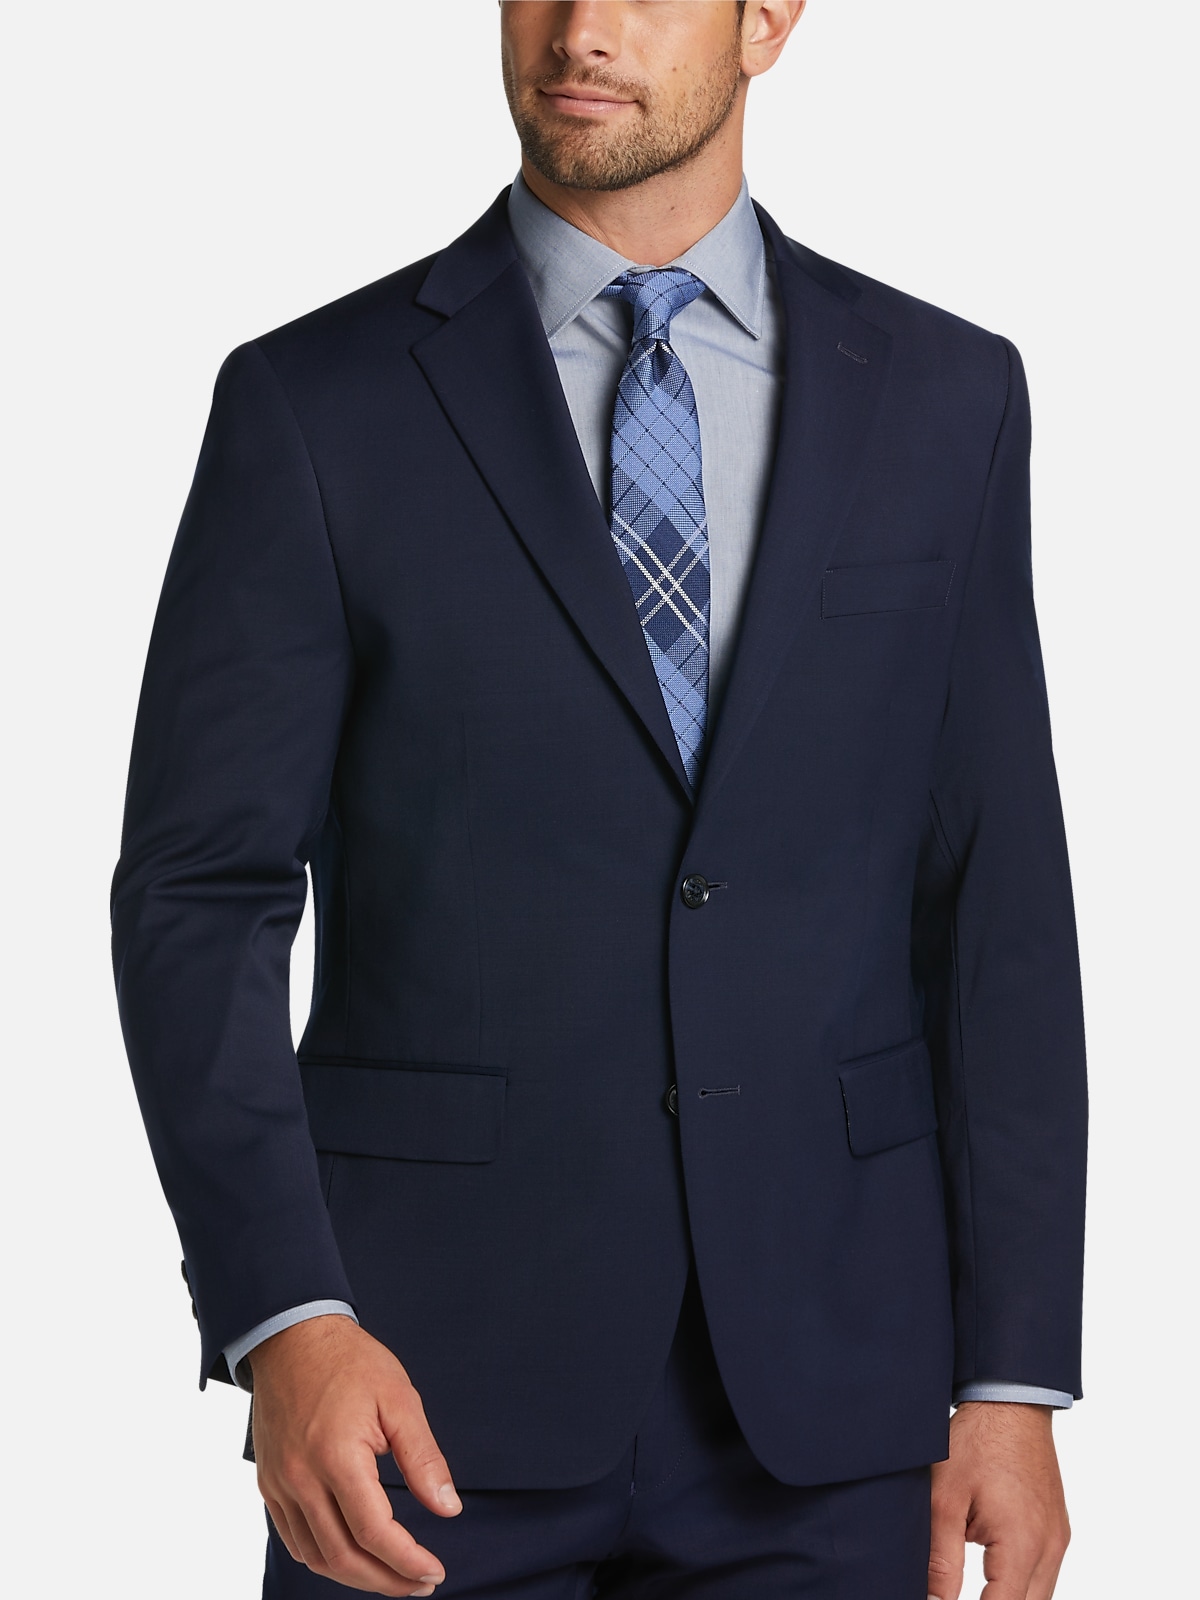 This Tommy Hilfiger Suit Has All The Comfort and Style You Could